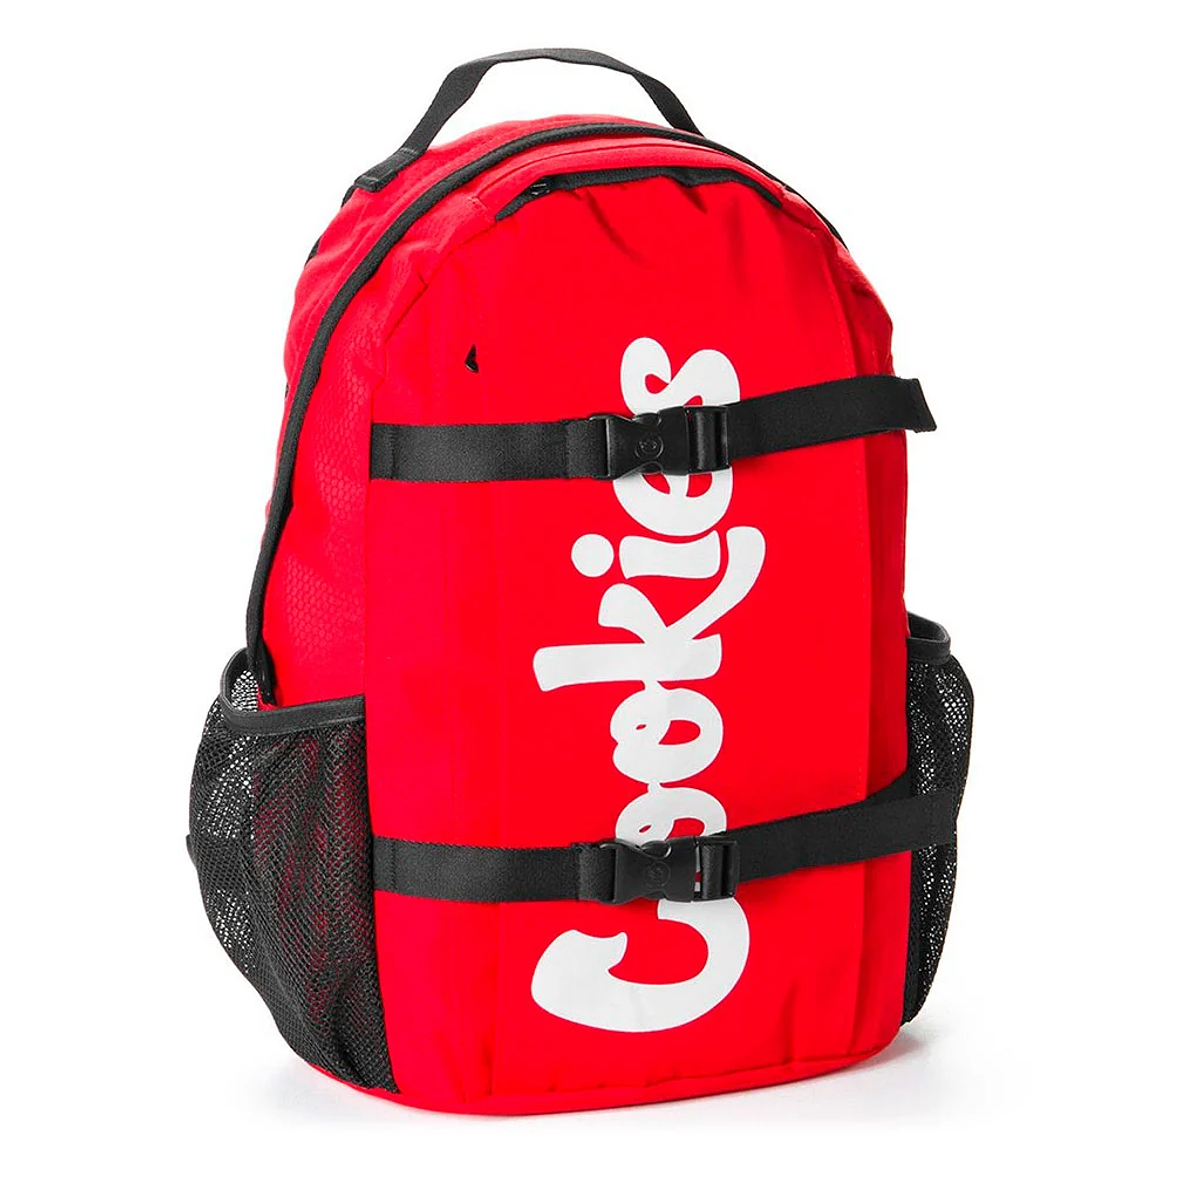 Cookies Backpack Smell Proof Nonstandar Red - Mochila ant...